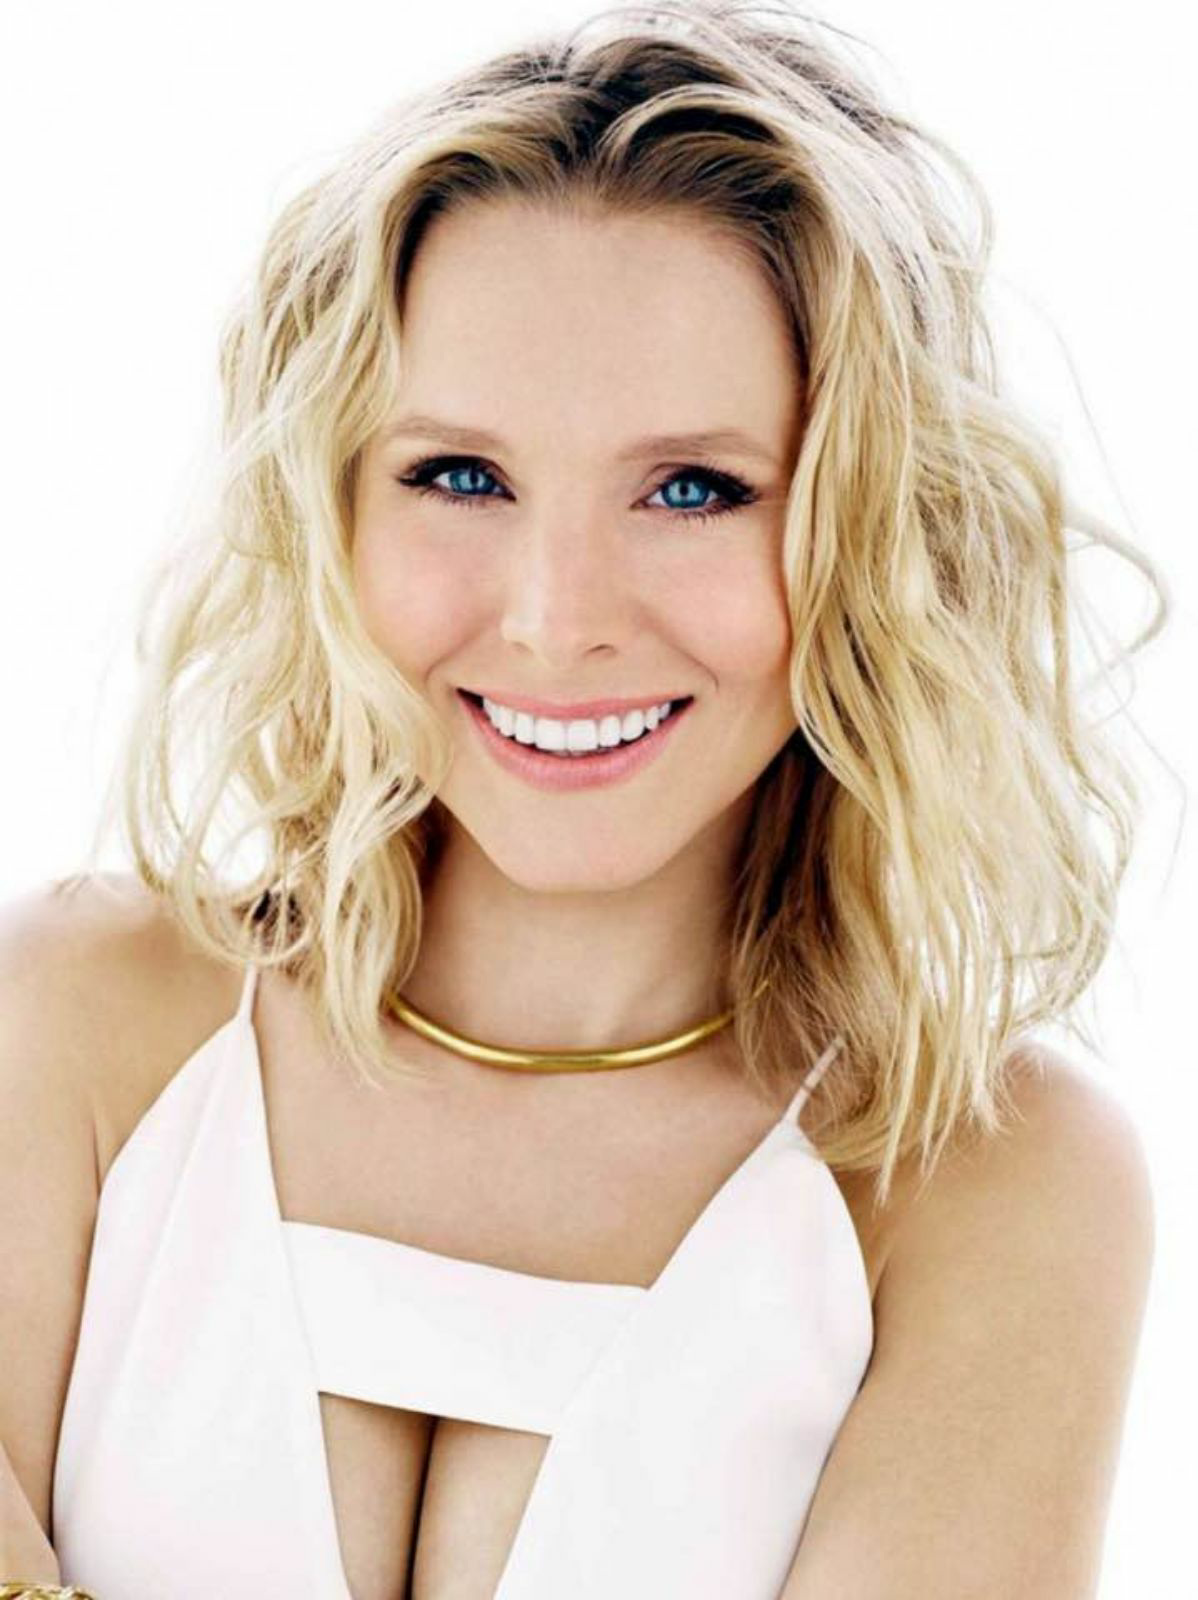 Come Rp As Kristen Bell For M